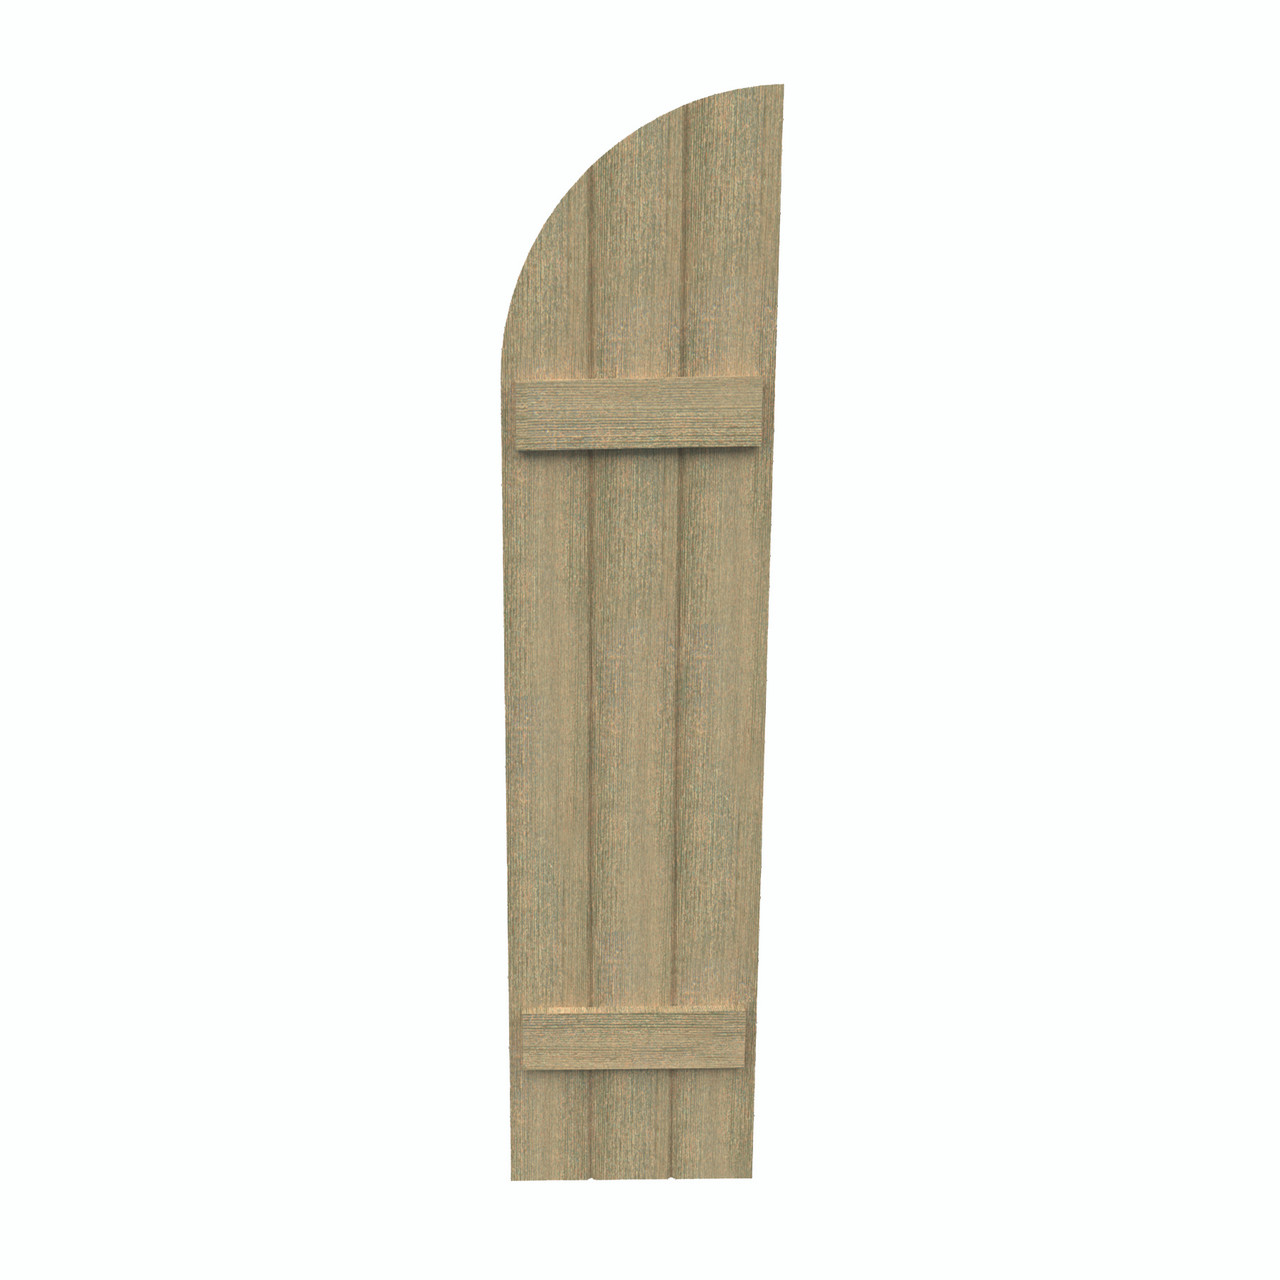 14 inch by 86 inch Quarter Round Shutter with 3-Boards